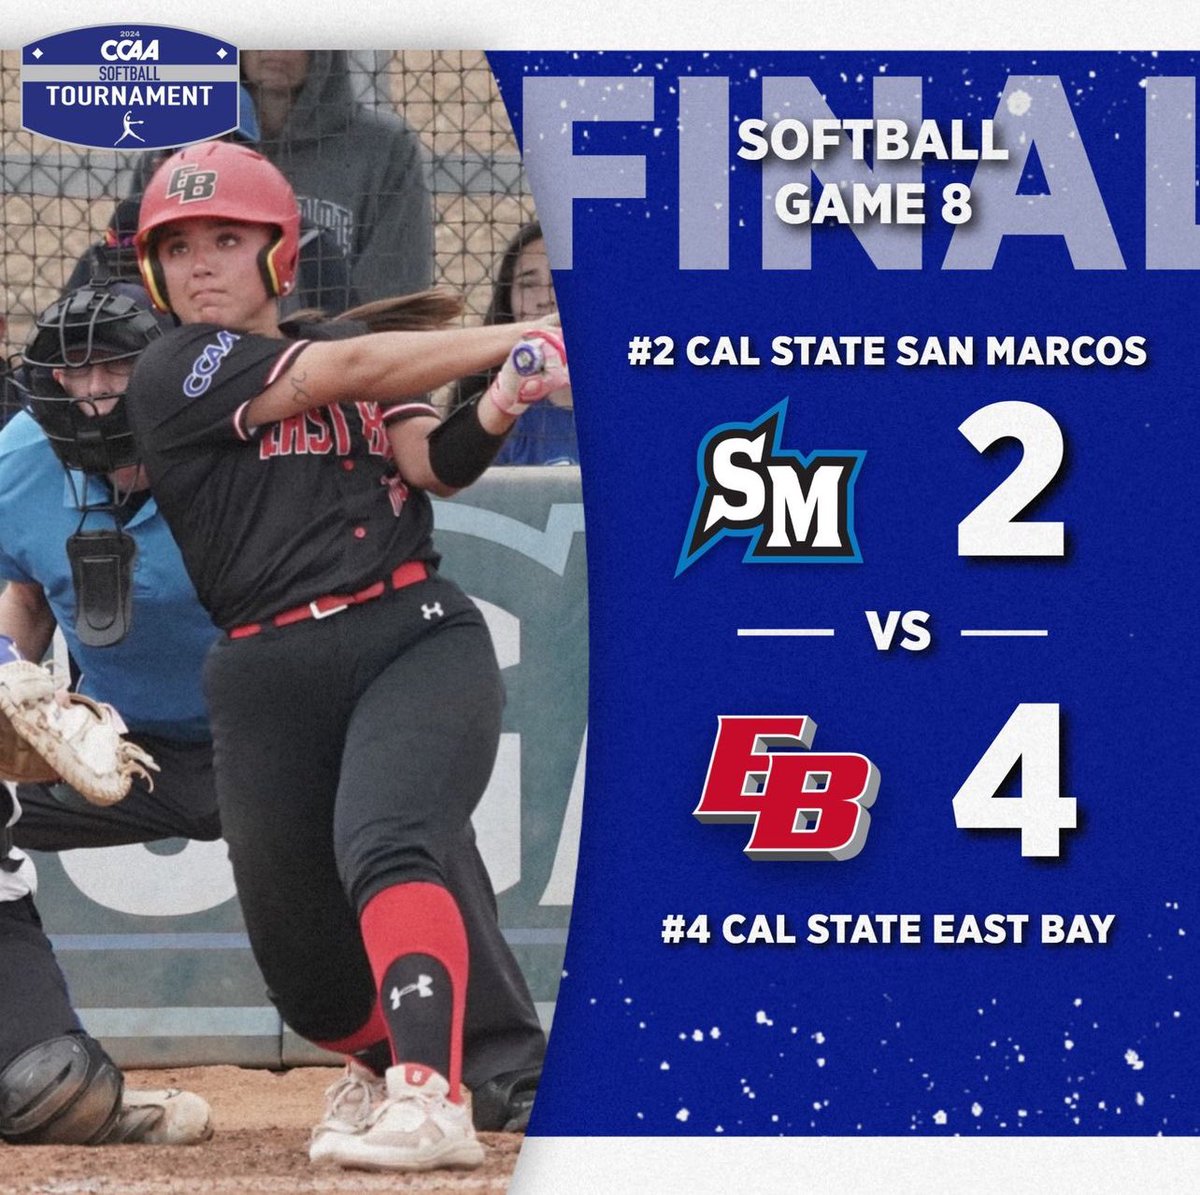 The Pioneers get a great relief appearance from Ashlee Toy and a big three-run homer from Cynthia Carrillo to force the If Necessary Game. It will also come down to this contest to determine the 2024 CCAA Softball Tournament Champions. #GoCCAA